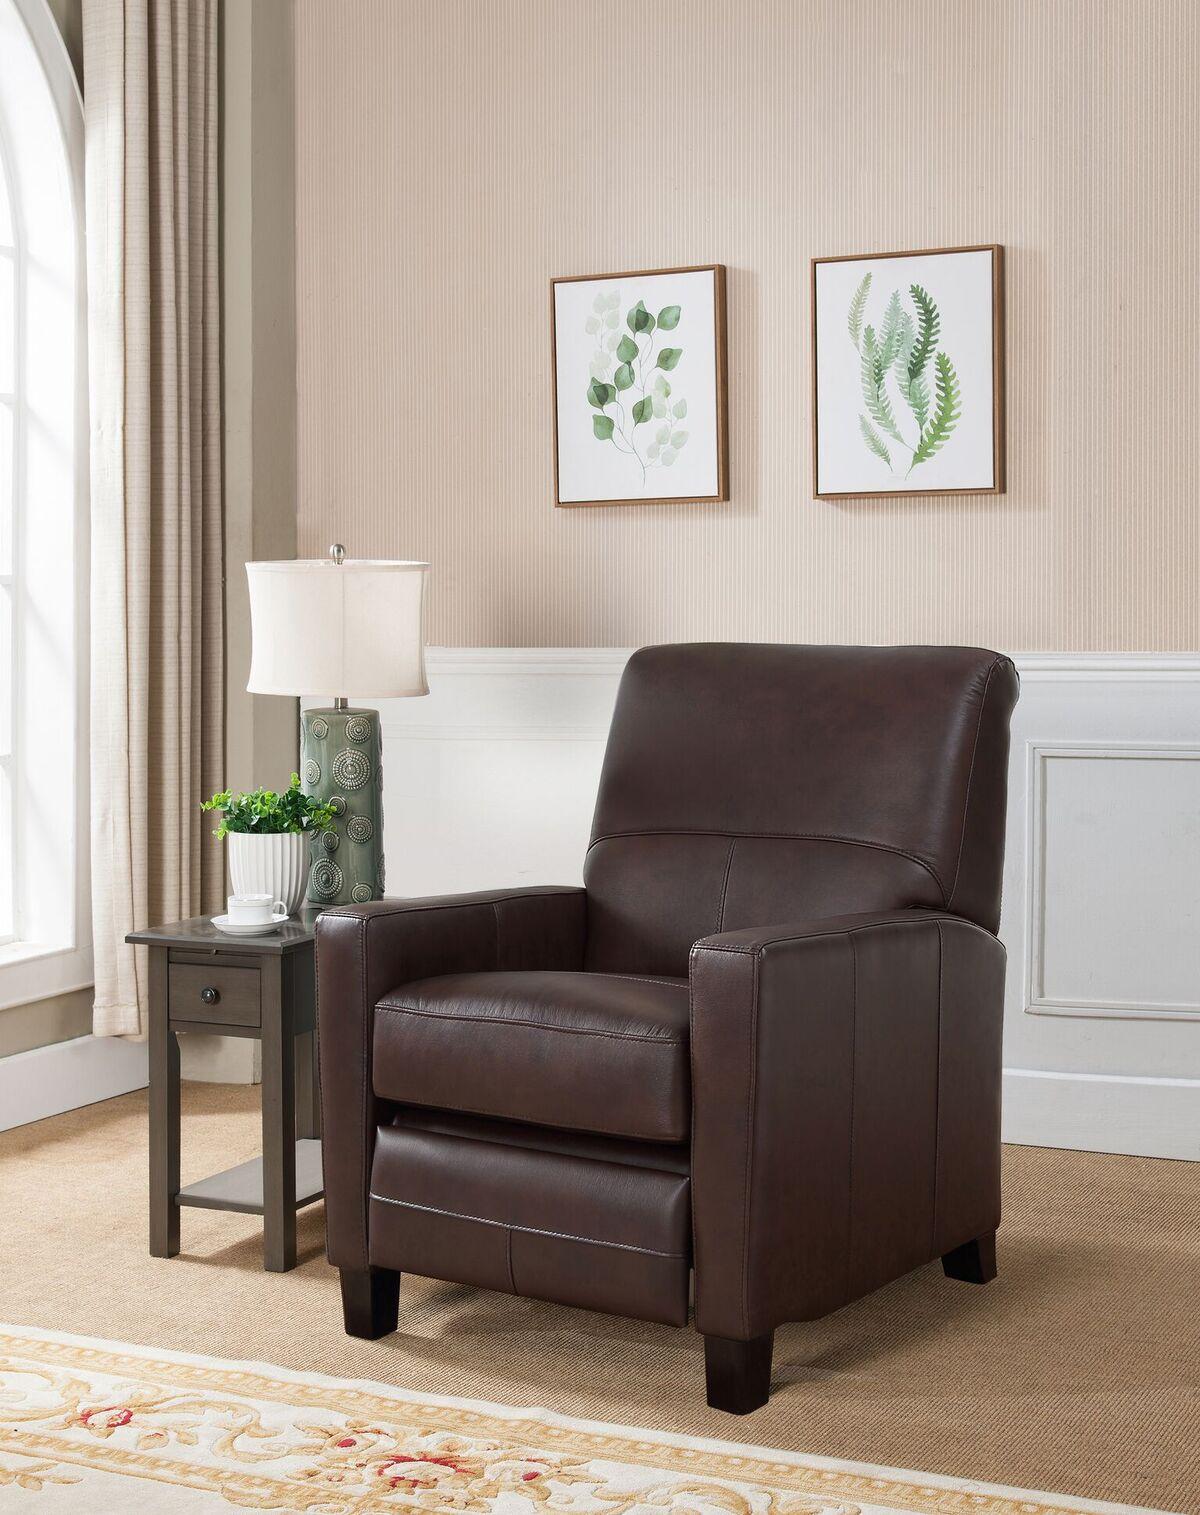 

    
Top Grain Leather Brown Recliner Conway HYDELINE® Contemporary
